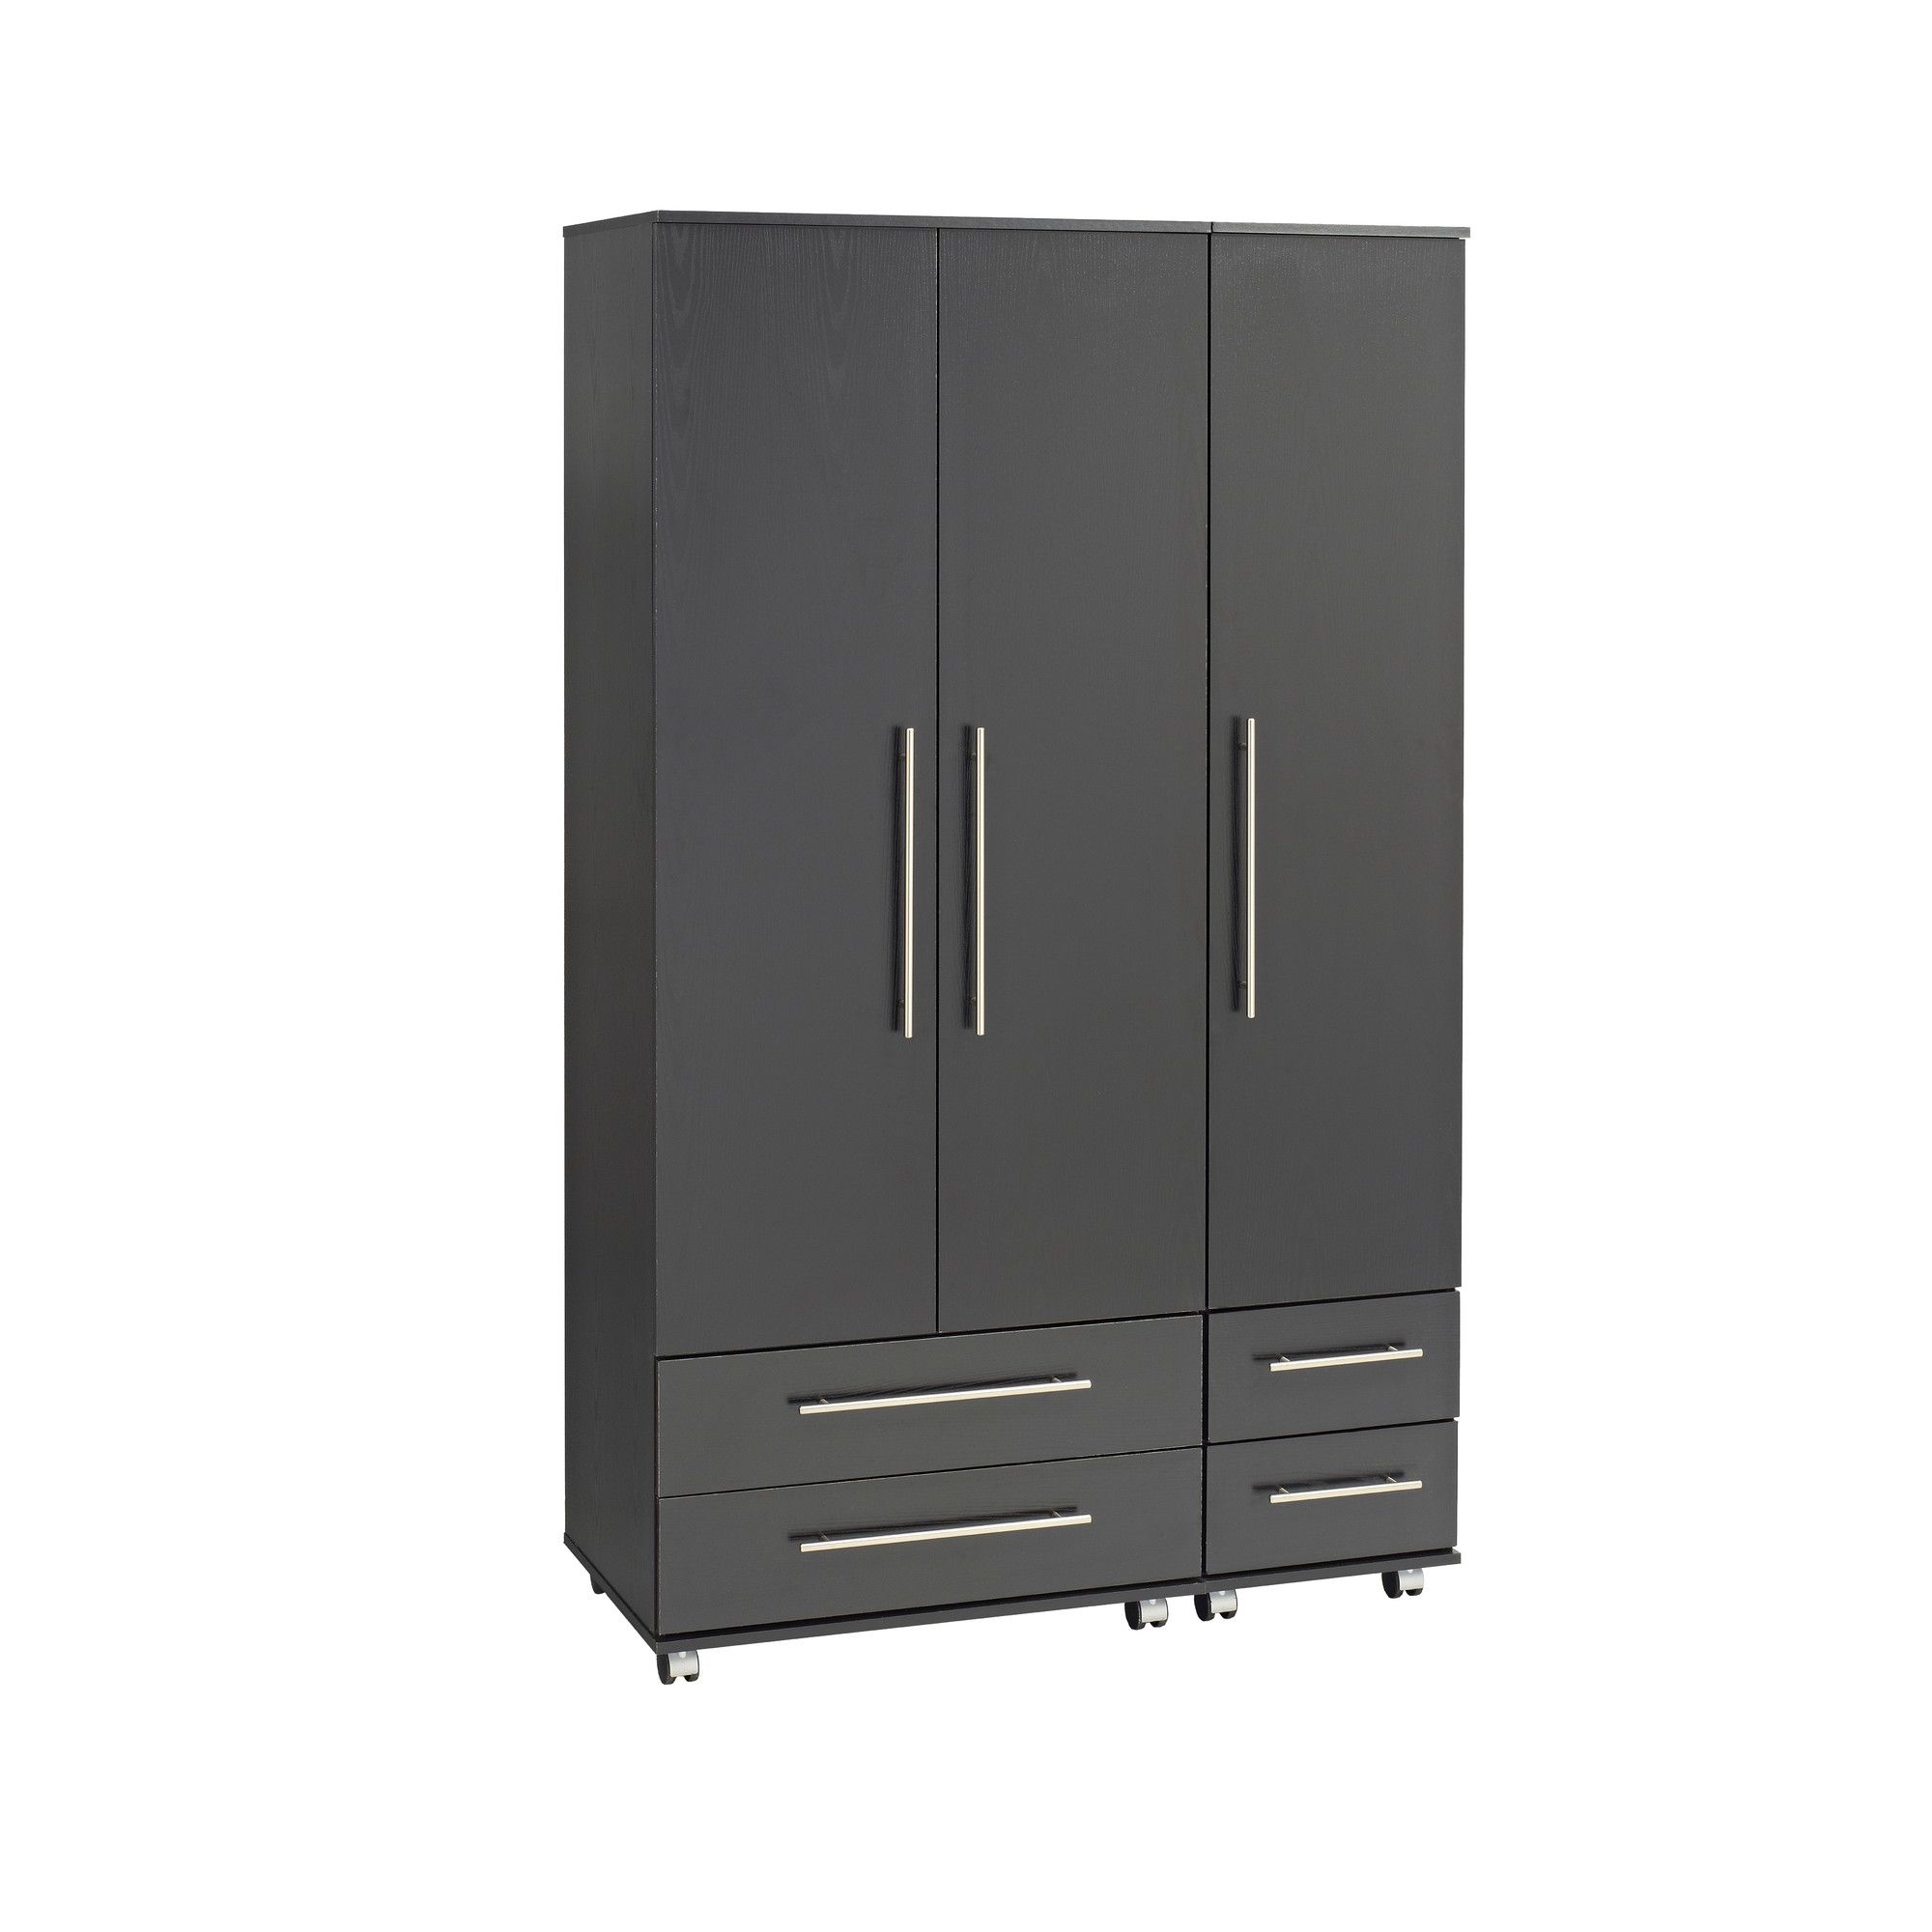 Ideal Furniture Bobby Triple Wardrobe with Four Drawers - Aida Walnut at Tesco Direct